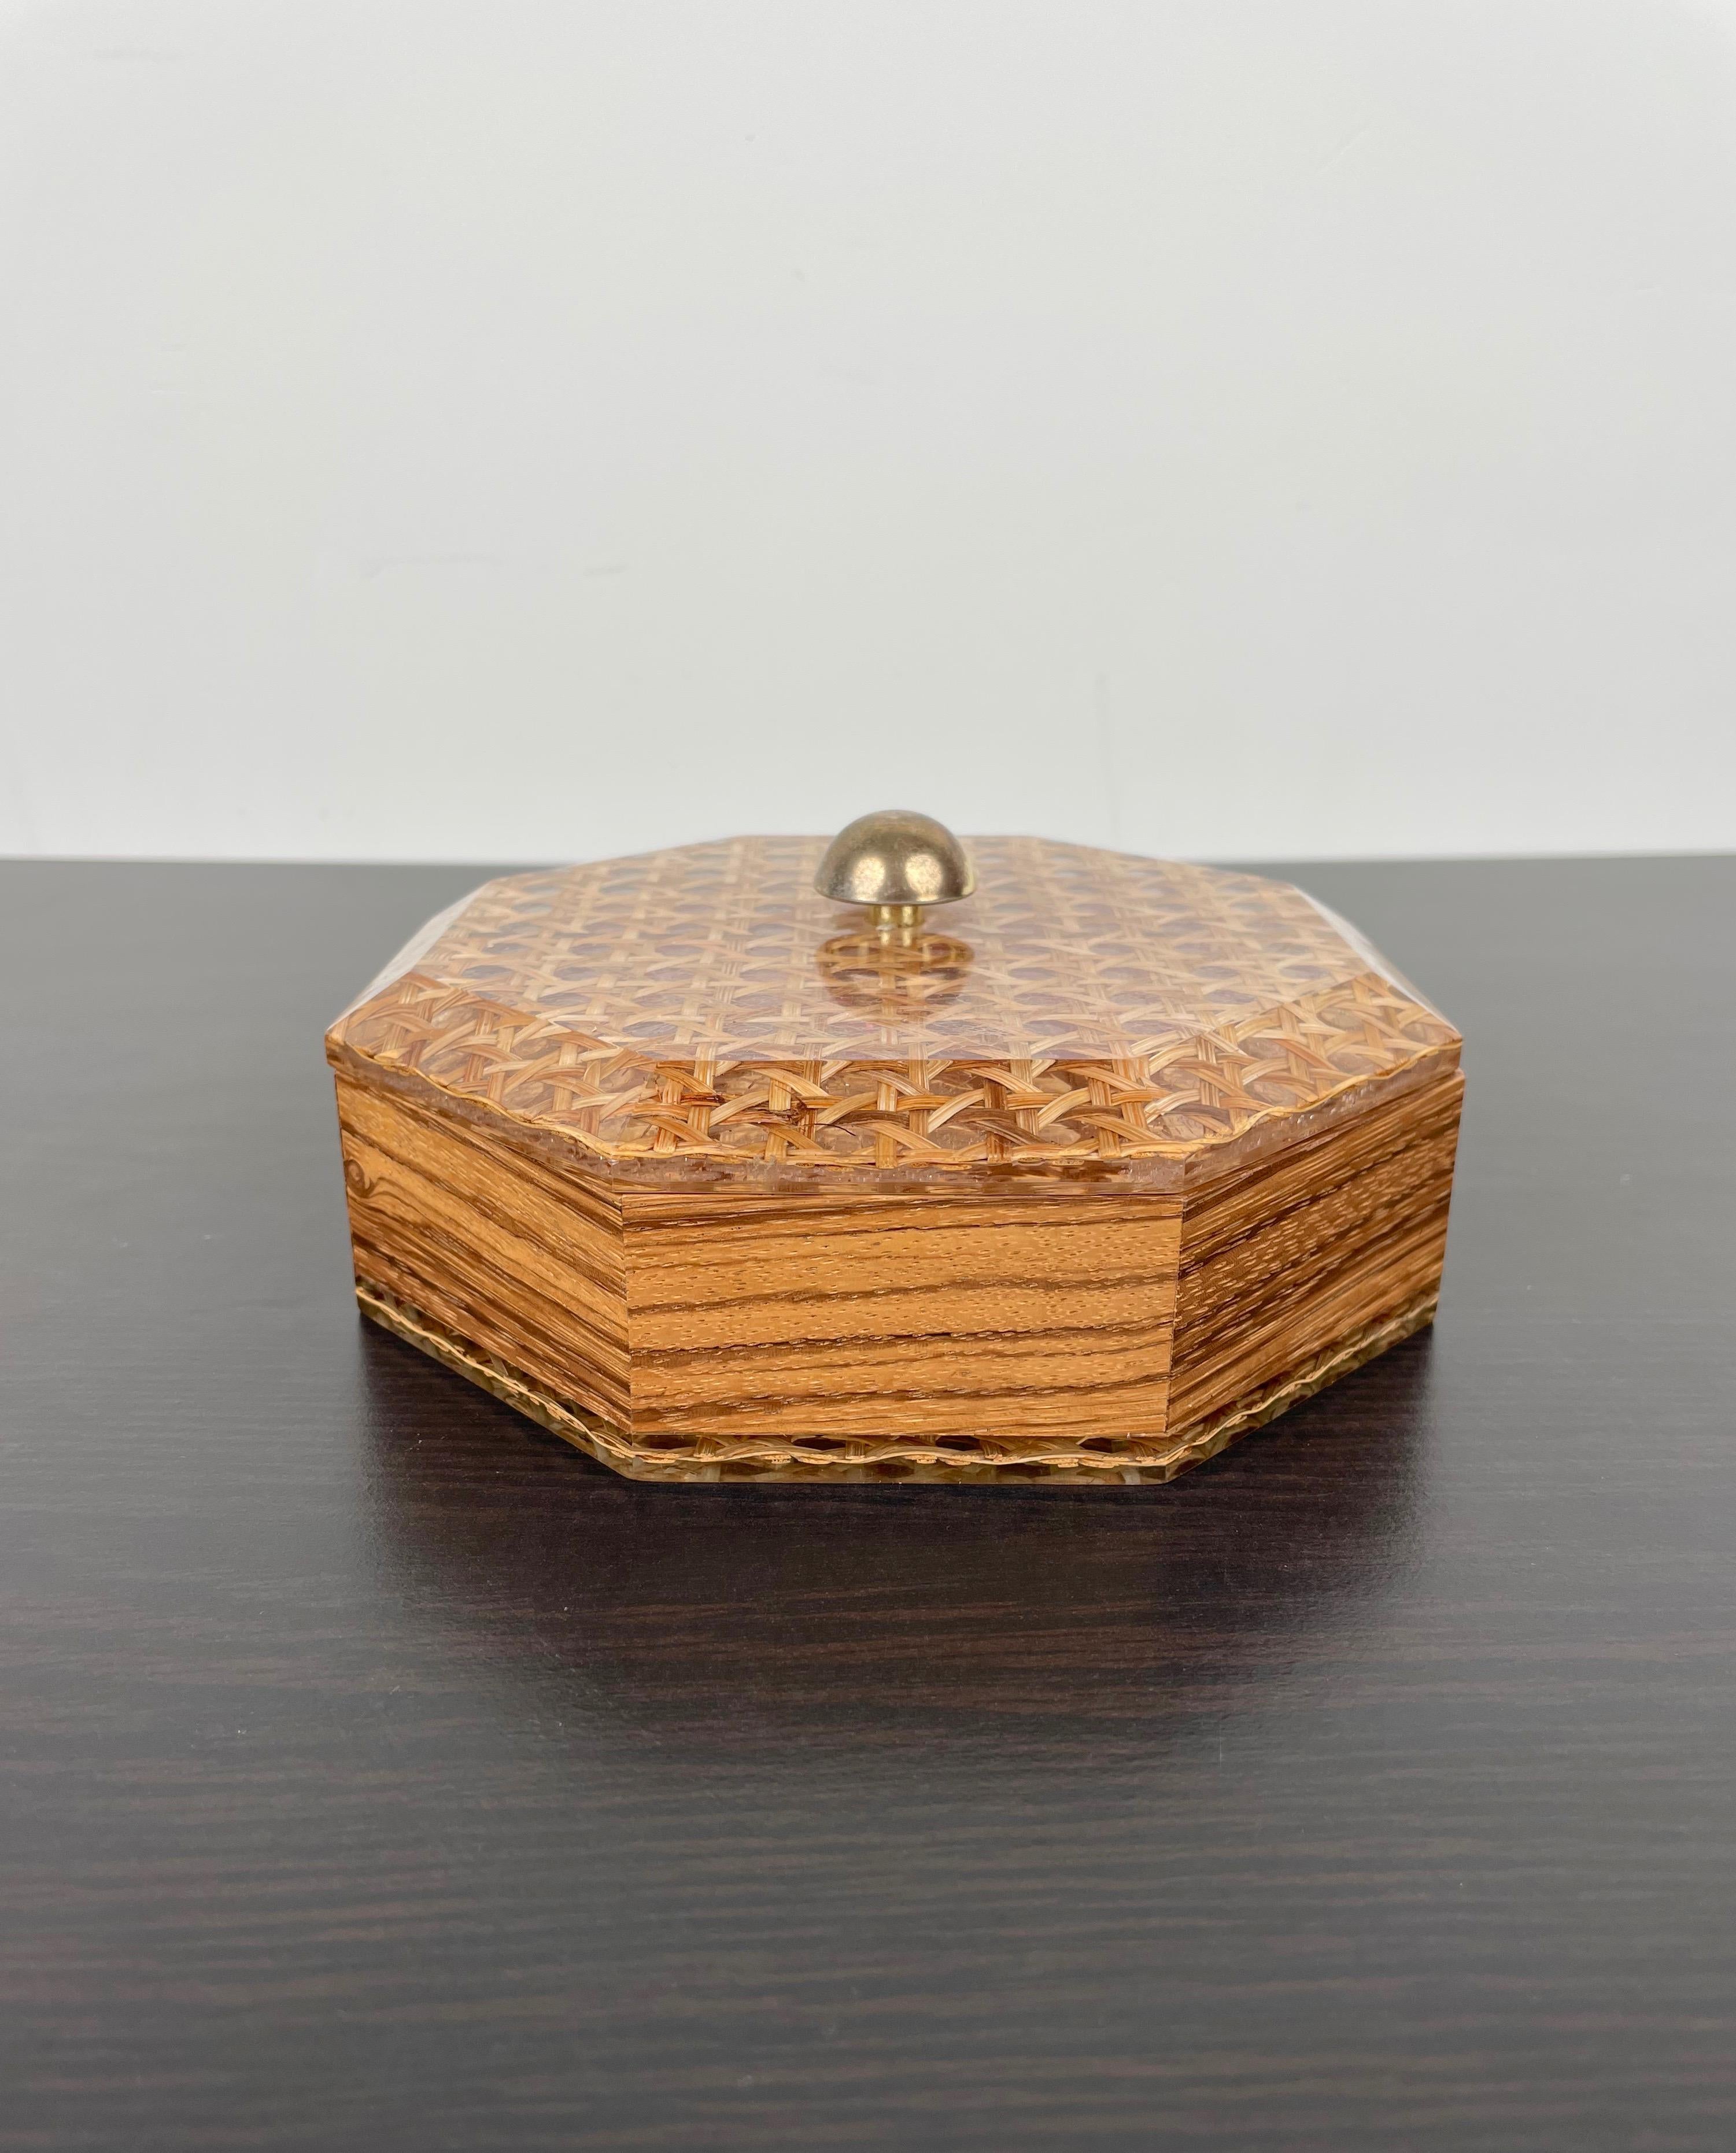 French Octagonal Box in Lucite Wicker Wood and Brass Christian Dior Style, France 1970s For Sale